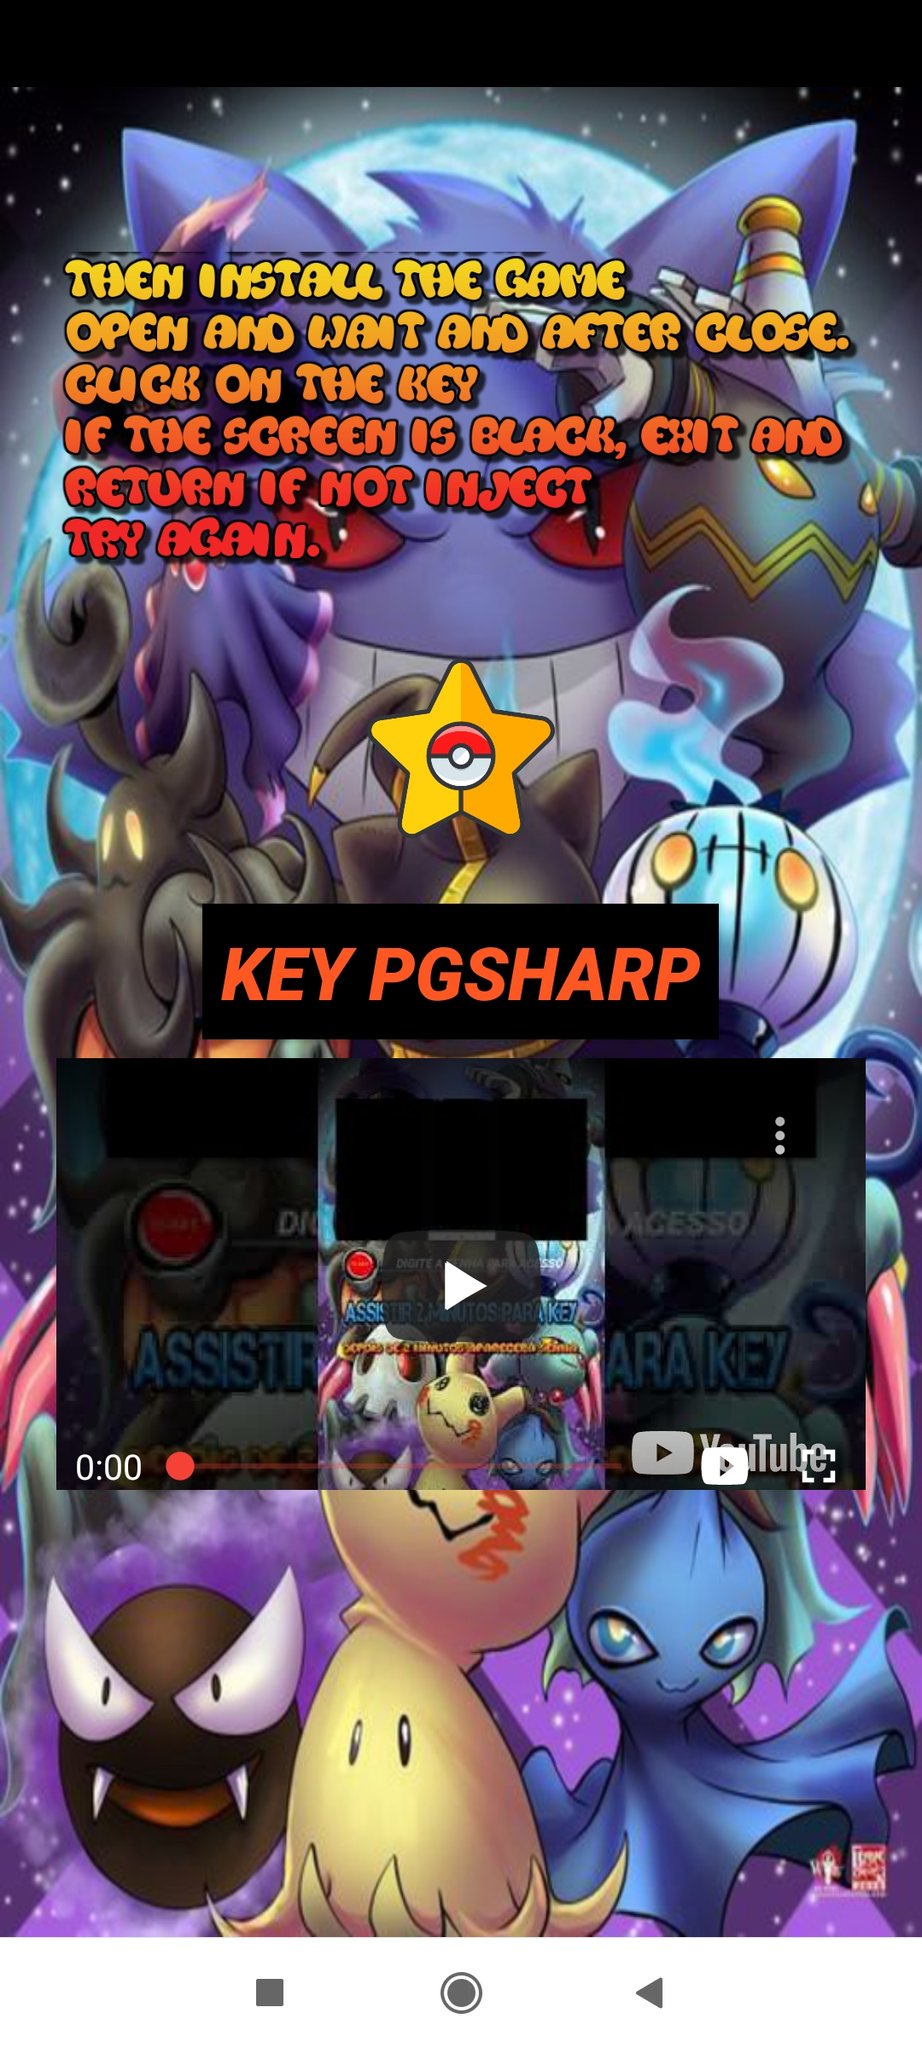 💯✨🕵👀 ENGEL GO 🚨📱 💯✨ on X: 🚨👉 Beto made this #PGSHARP MOD free with  all features of Standard Edition key for everyone. Available until June 18  have you tried this cracked